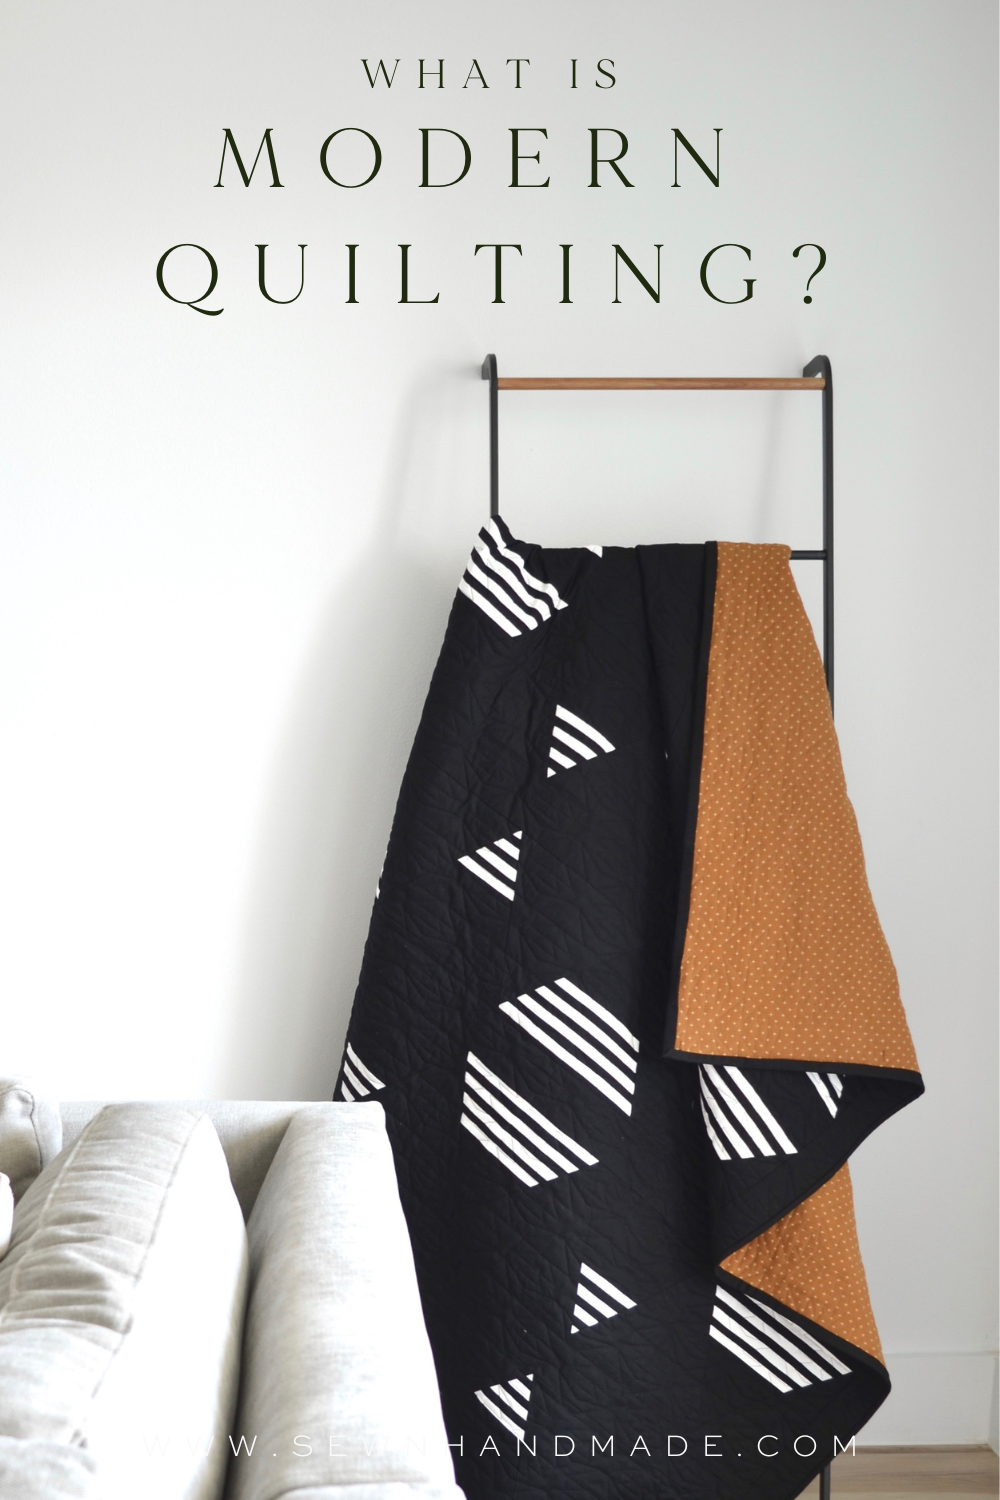 What is Modern Quilting? – Sewn Modern Quilt Patterns by Amy Schelle